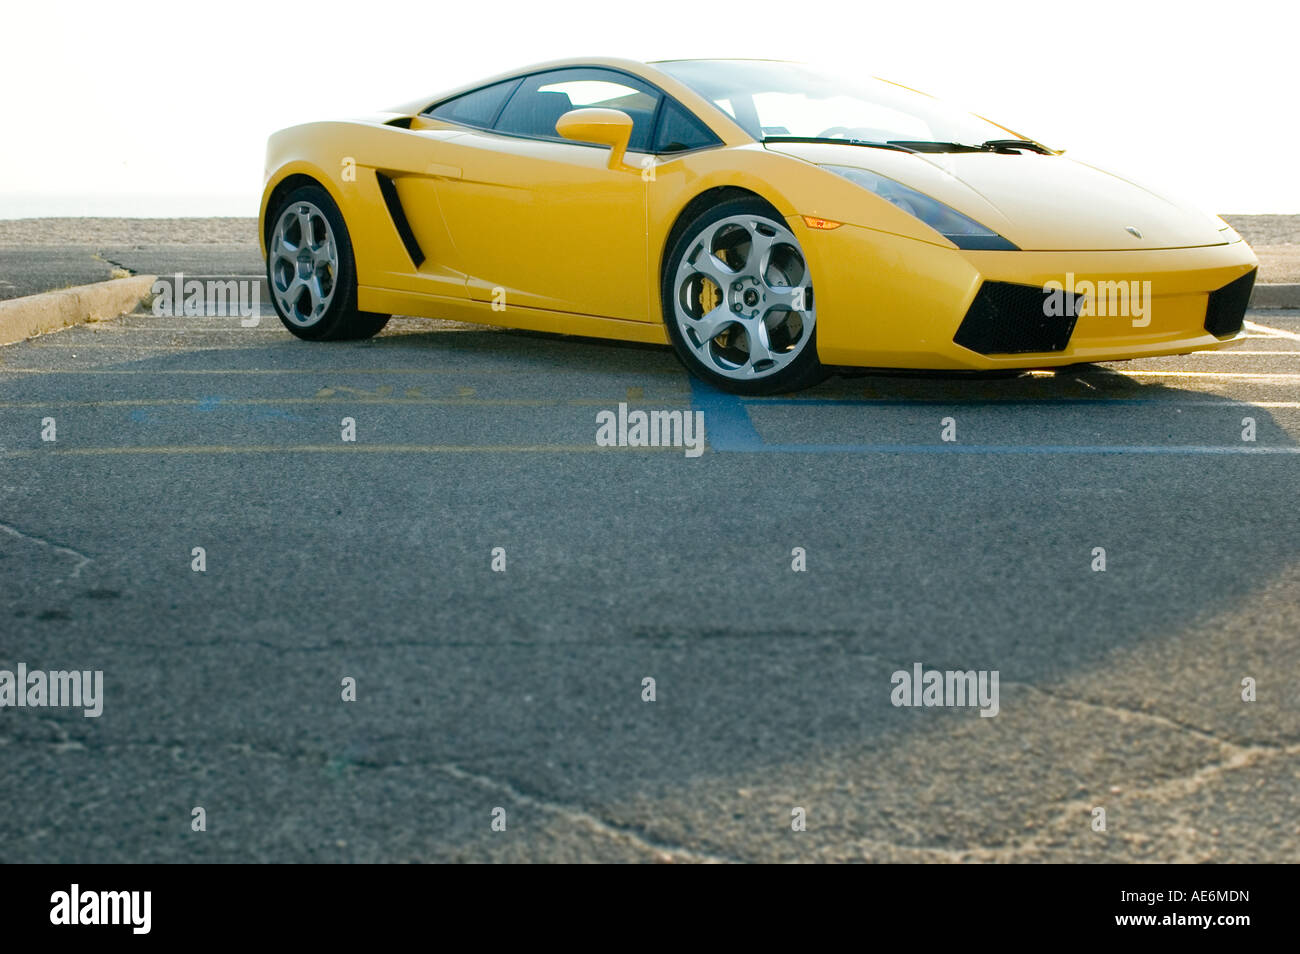 Exotic yellow sportscar, a symbol of success, wealth, speed, luxury, excess, flamboyance and desire Stock Photo